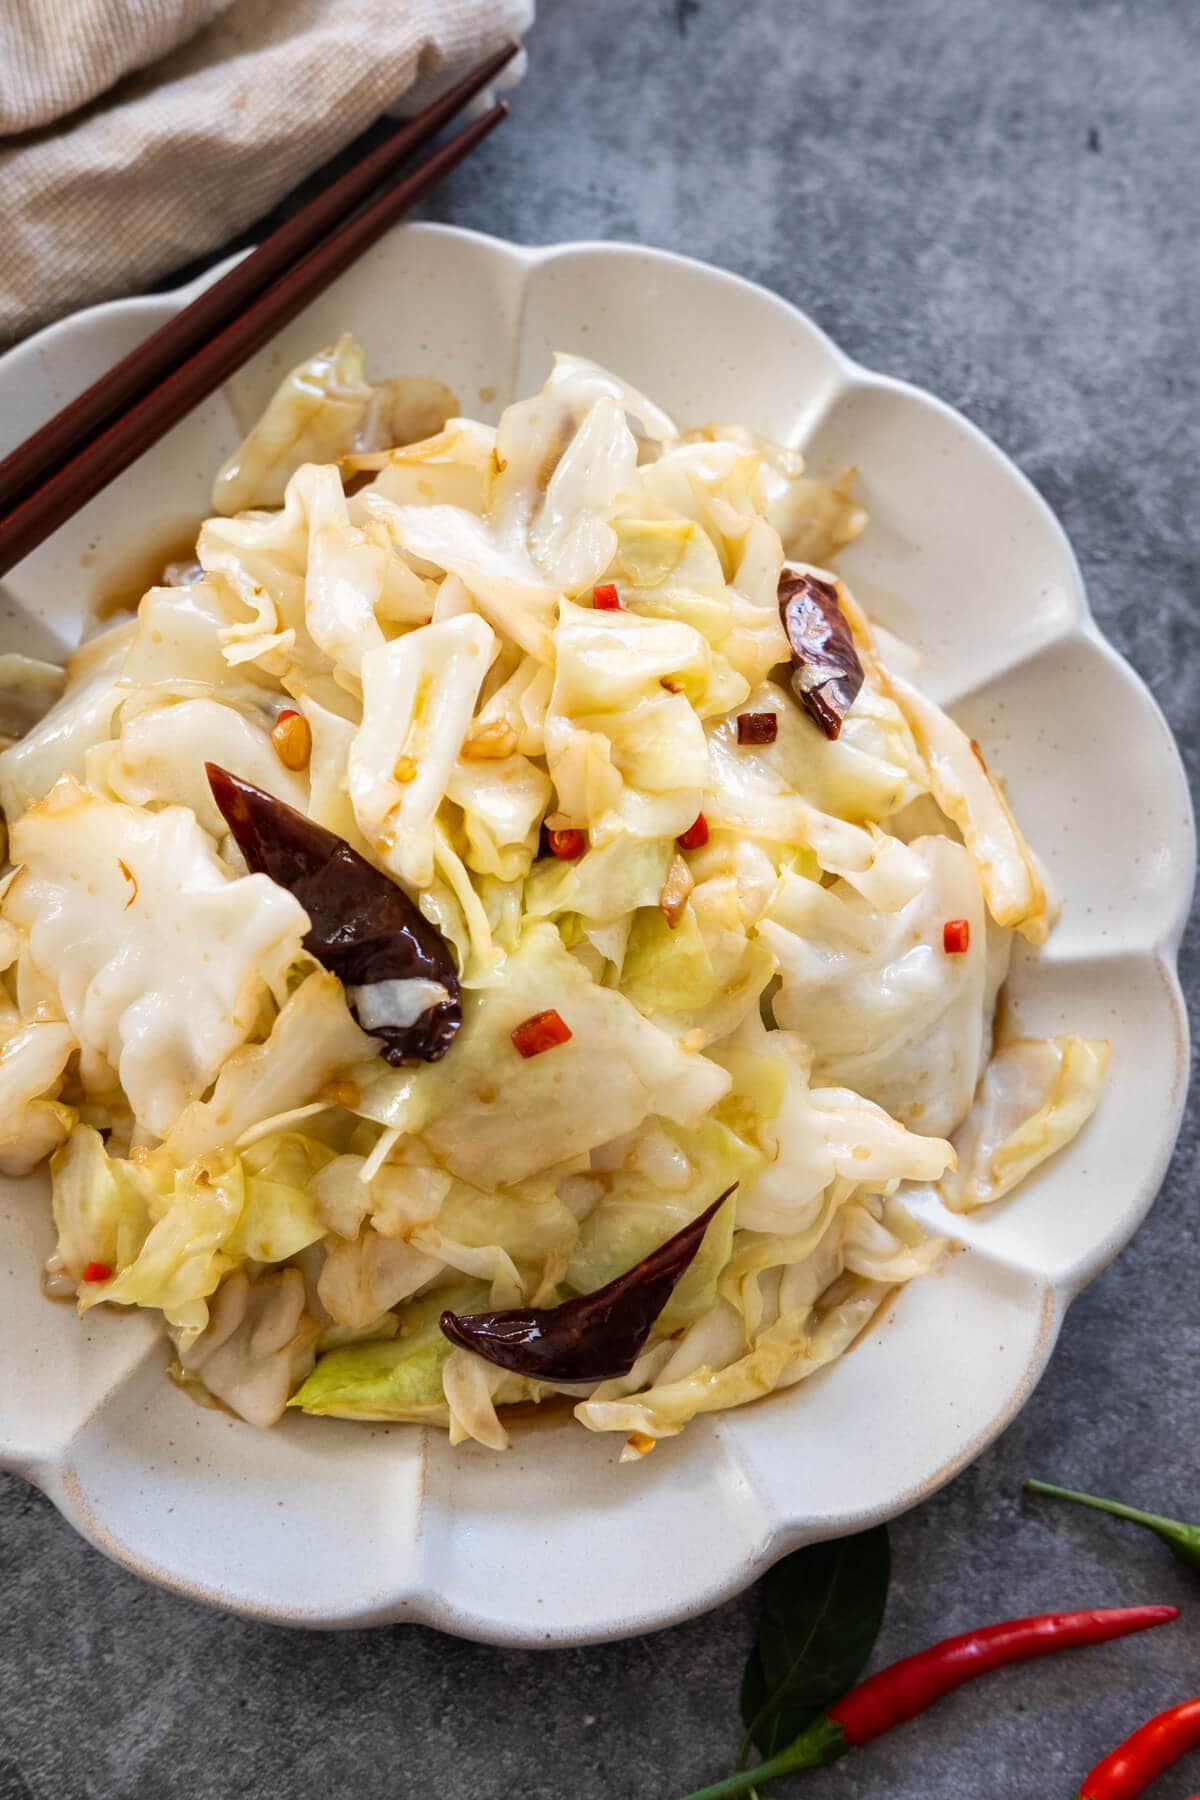 Spicy Sichuan cabbage is an easy cabbage recipe to make at home.